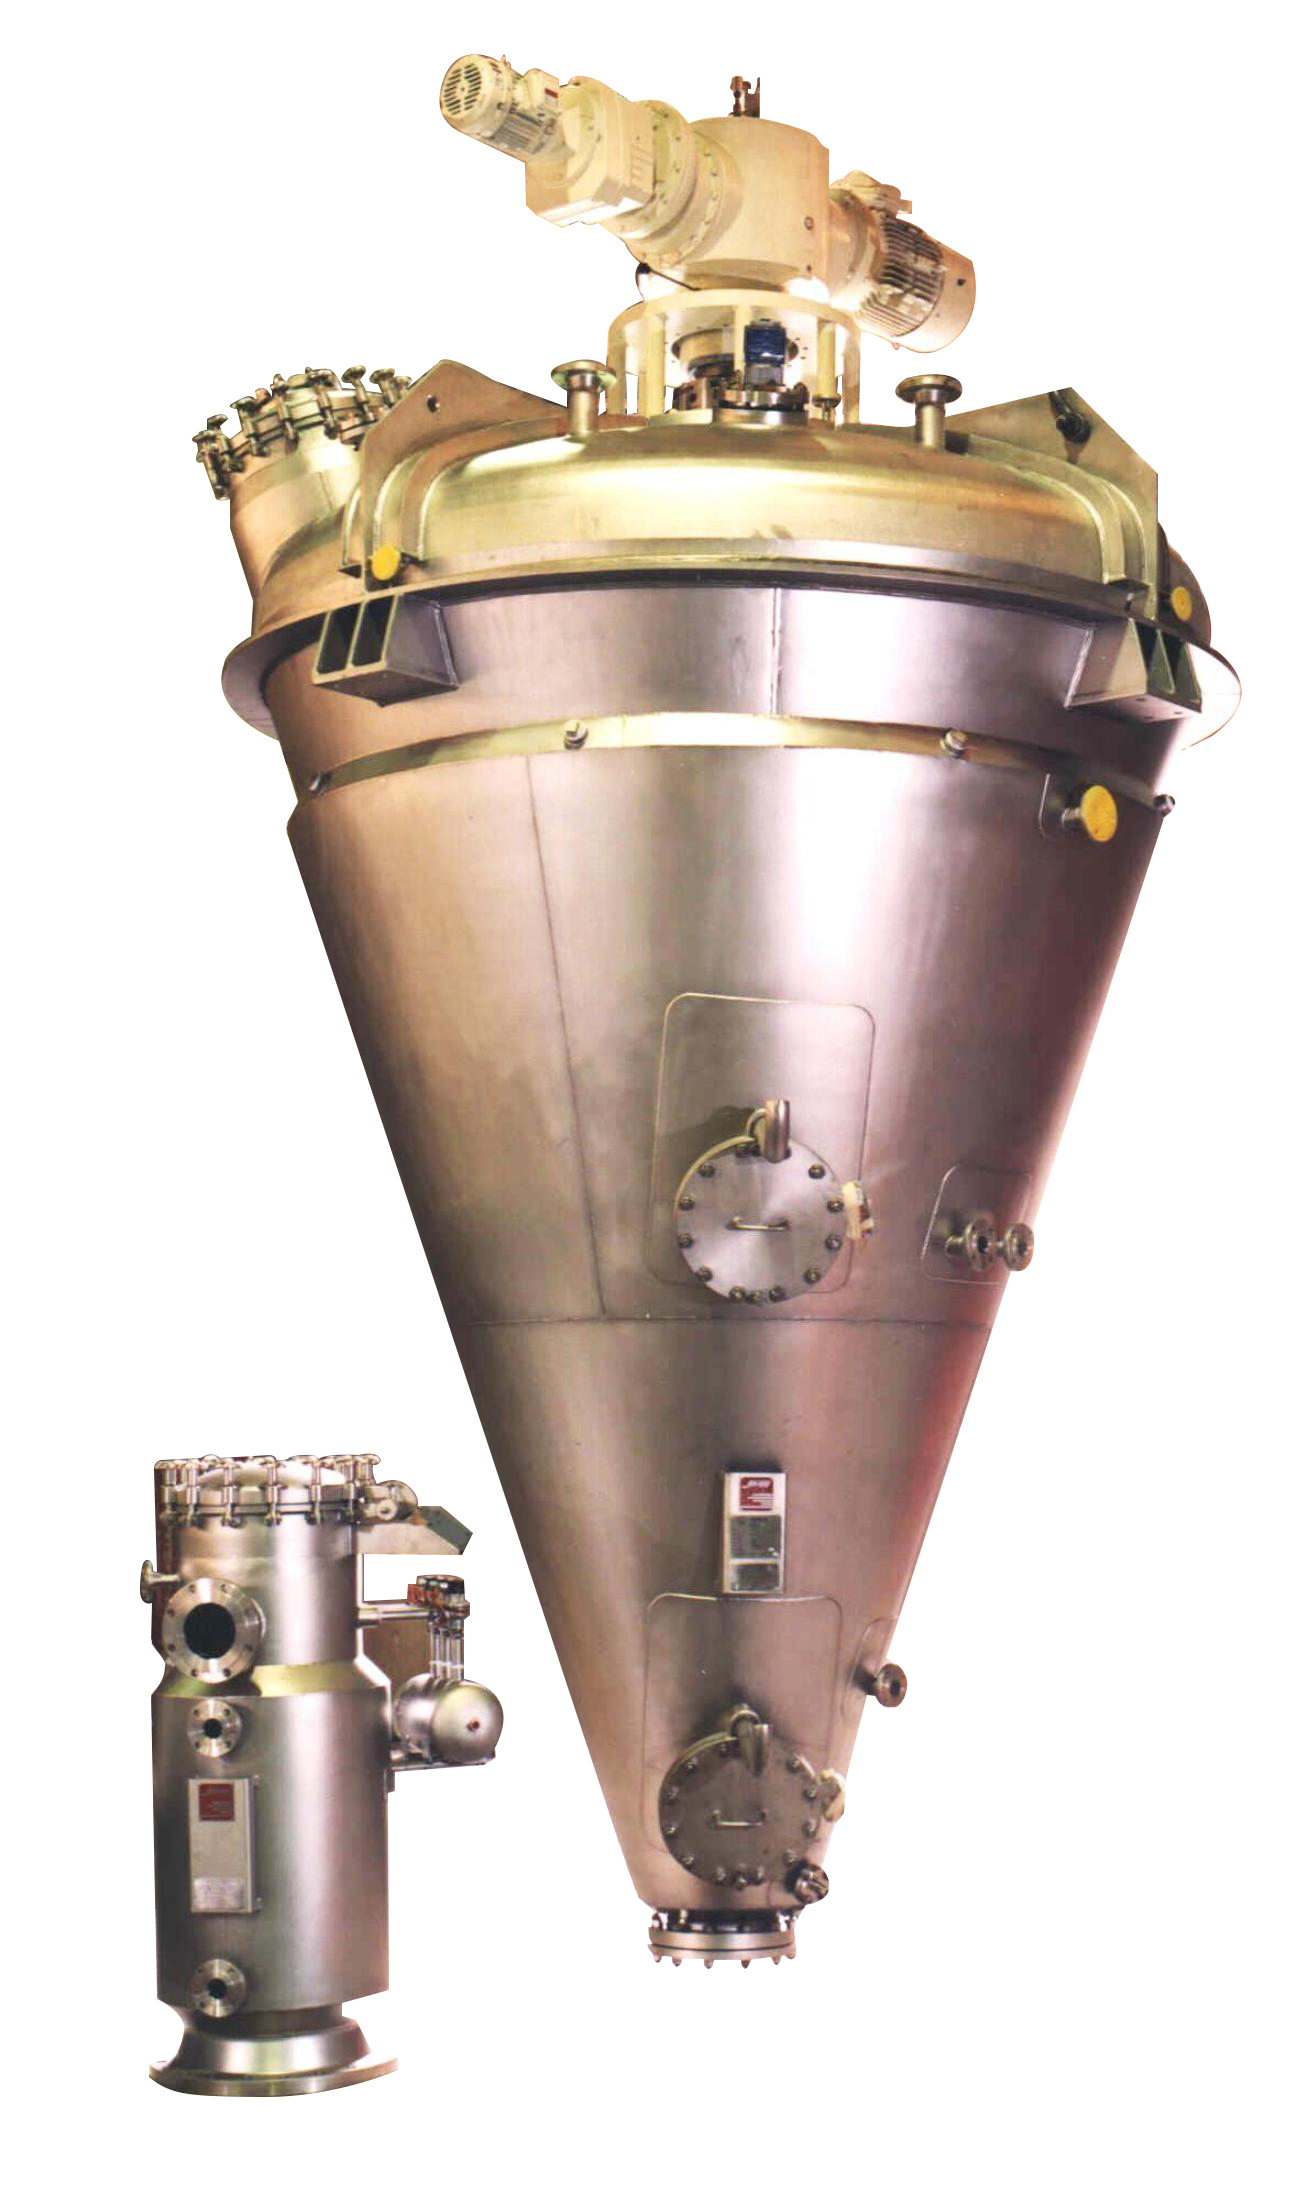 New Conical mixer and blender